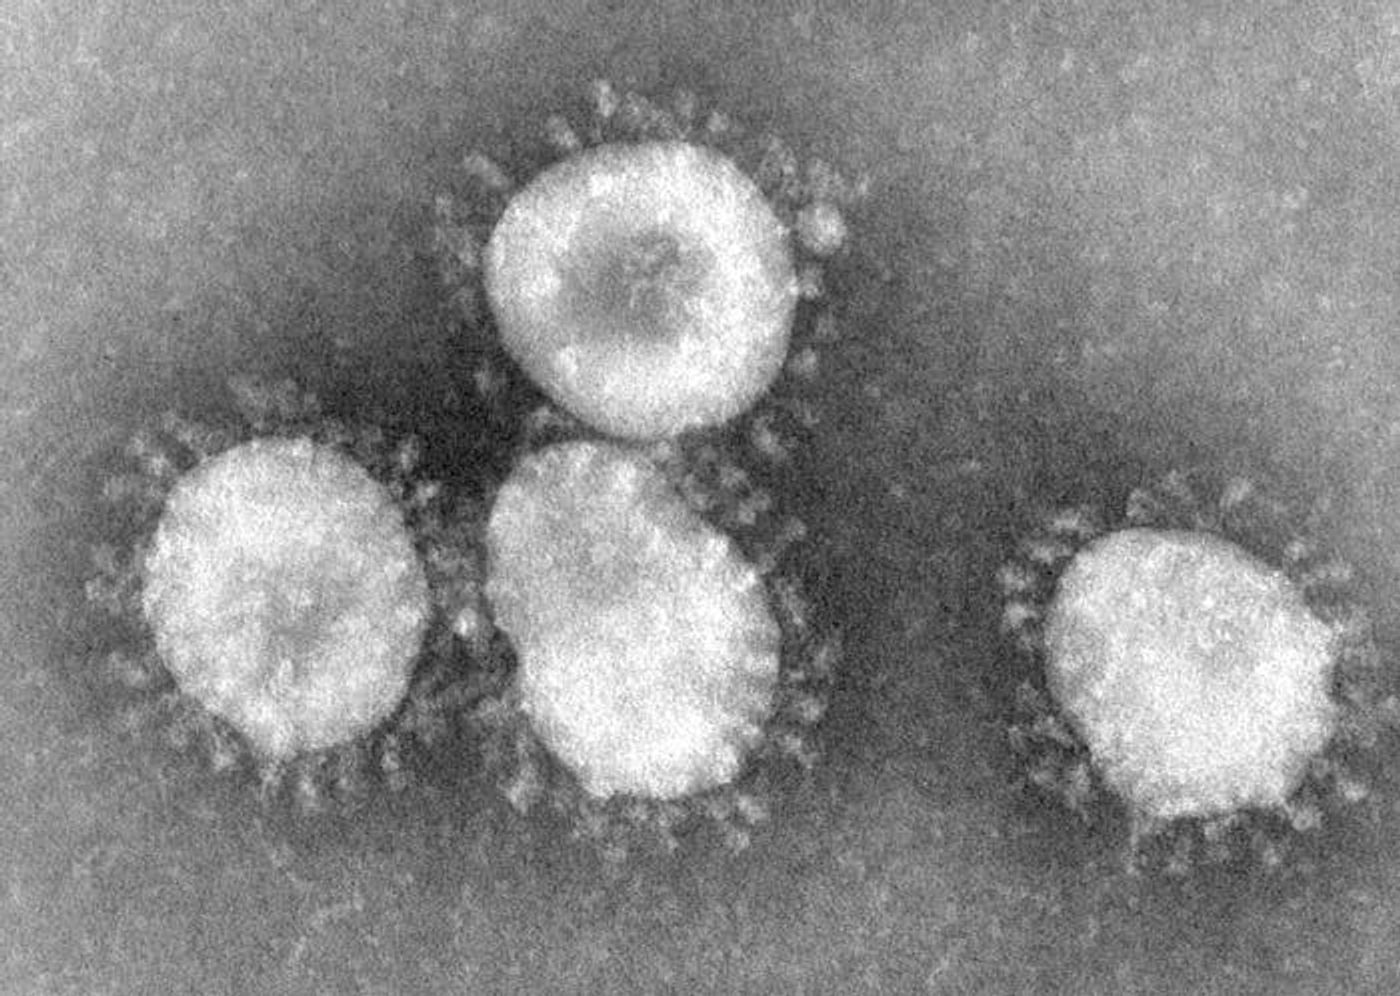 Coronaviruses are a group of viruses known for causing the common cold.